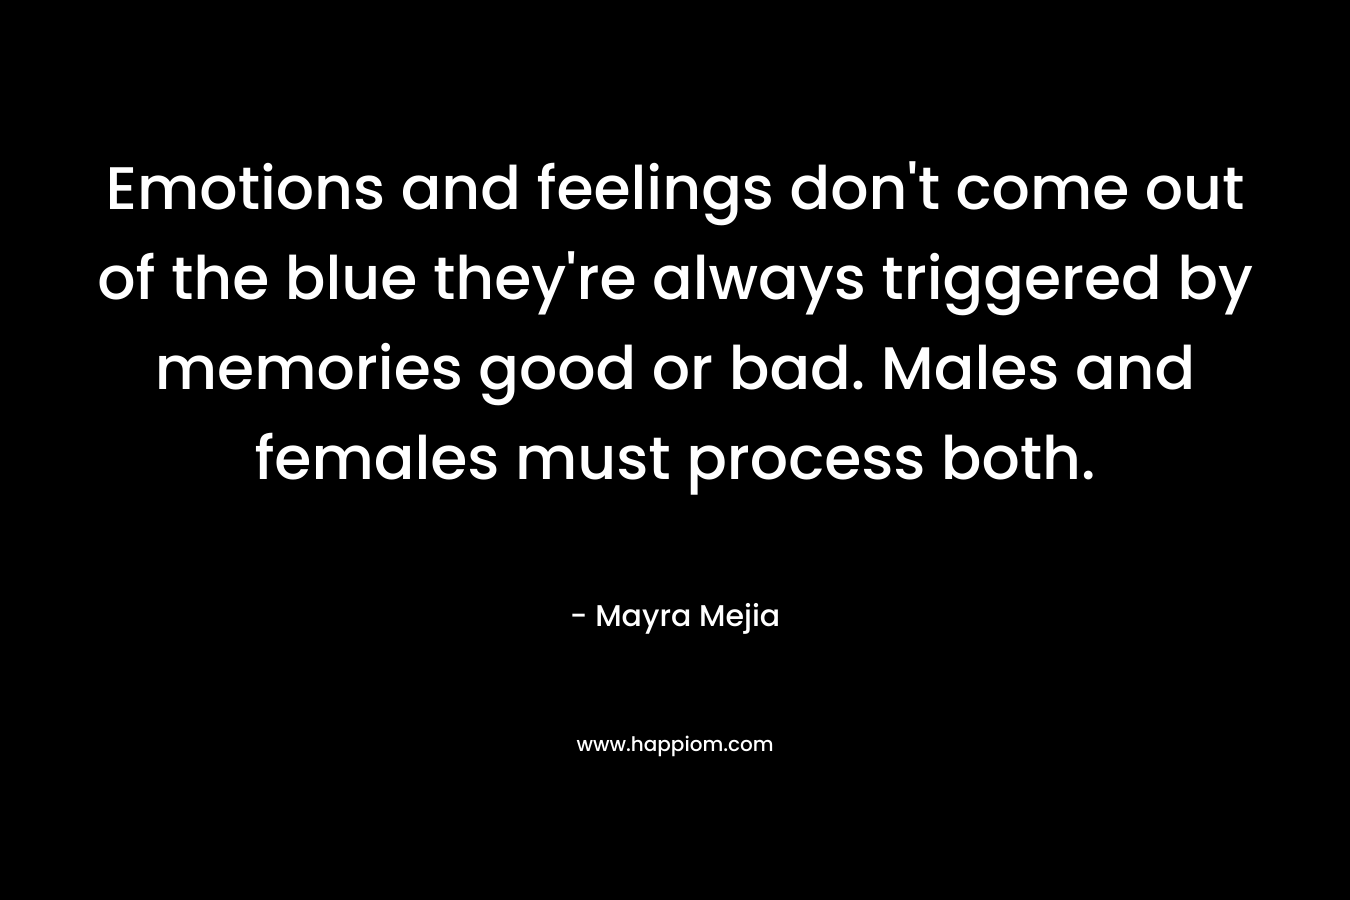 Emotions and feelings don't come out of the blue they're always triggered by memories good or bad. Males and females must process both.